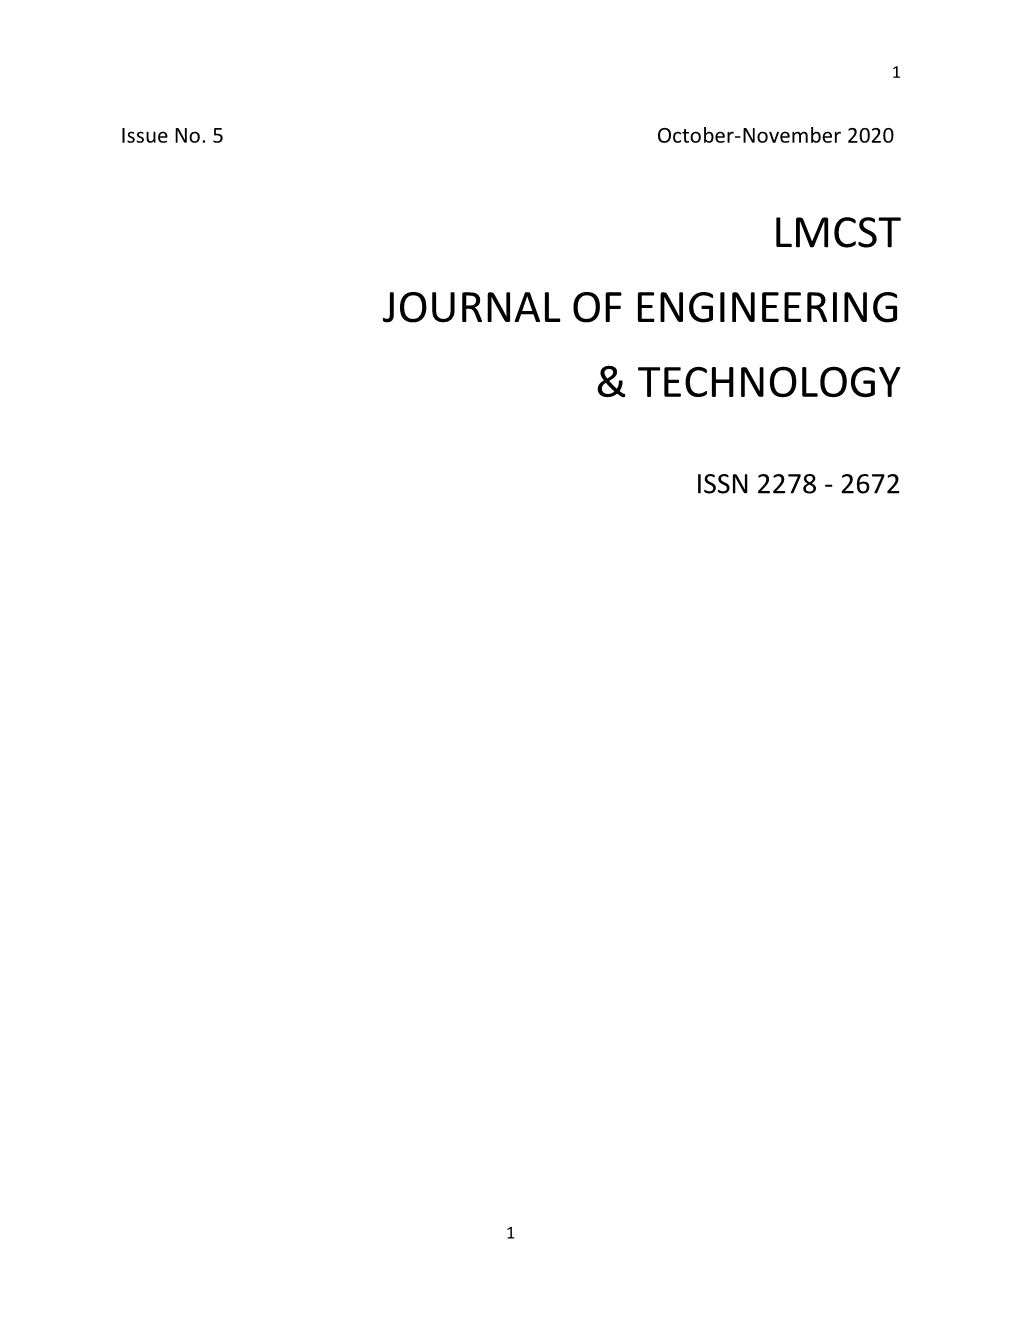 Lmcst Journal of Engineering & Technology